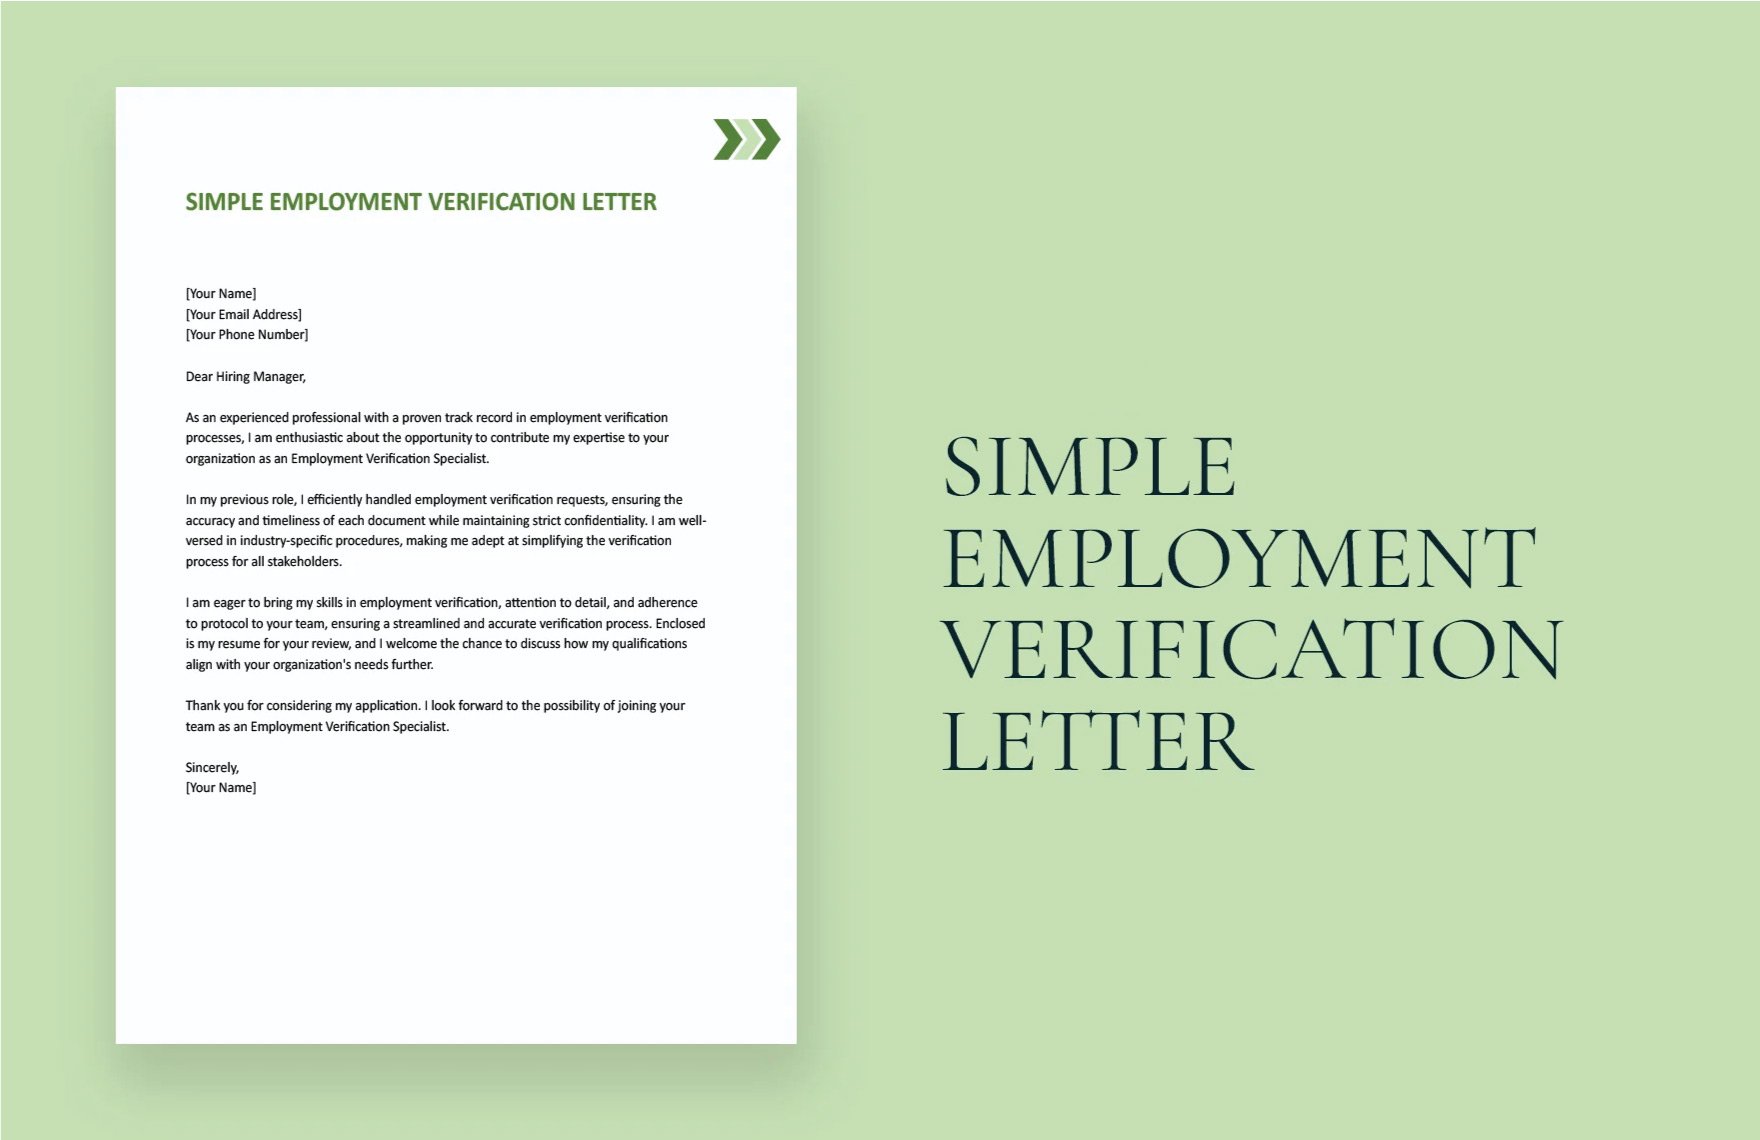 Free Simple Employment Verification Letter in Word, Google Docs